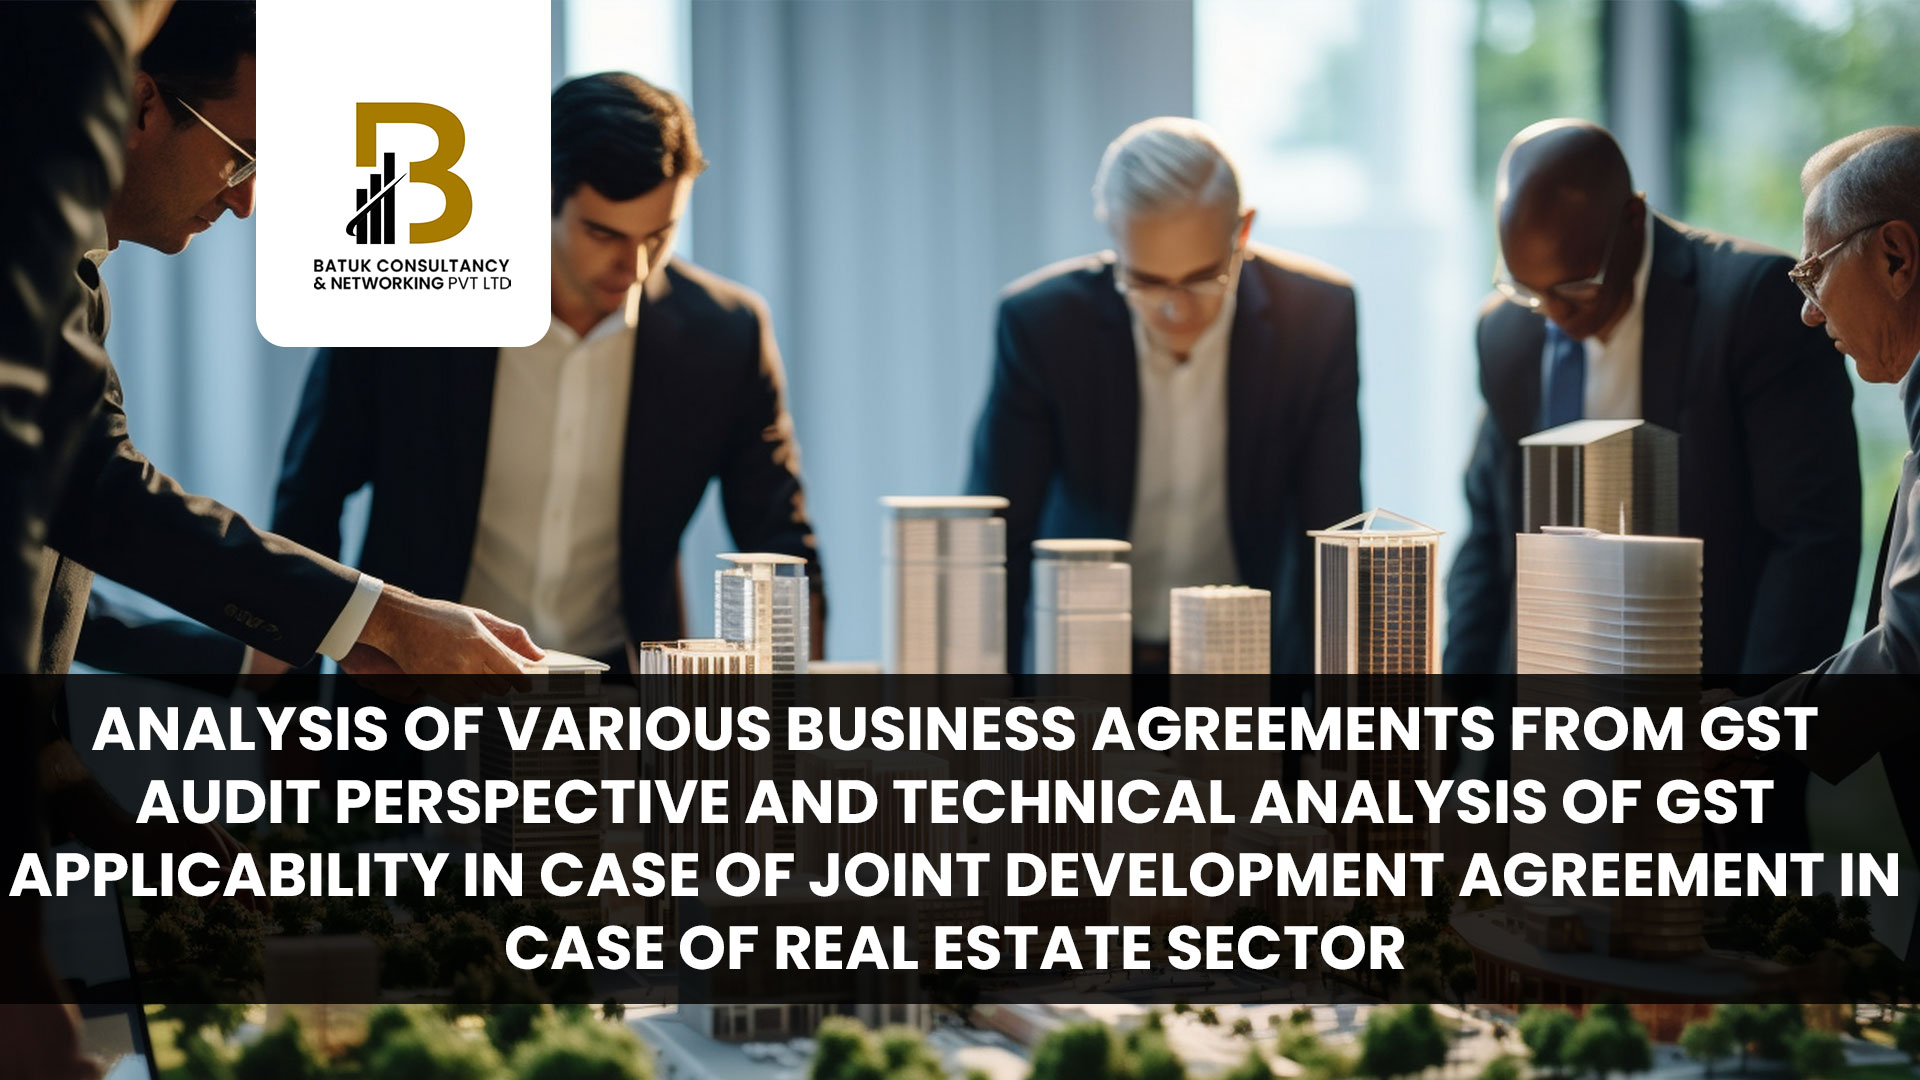 Analysis of Various Business Agreements from GST Audit Perspective and Technical Analysis of GST Applicability in case of Joint Development Agreement in case of Real Estate Sector